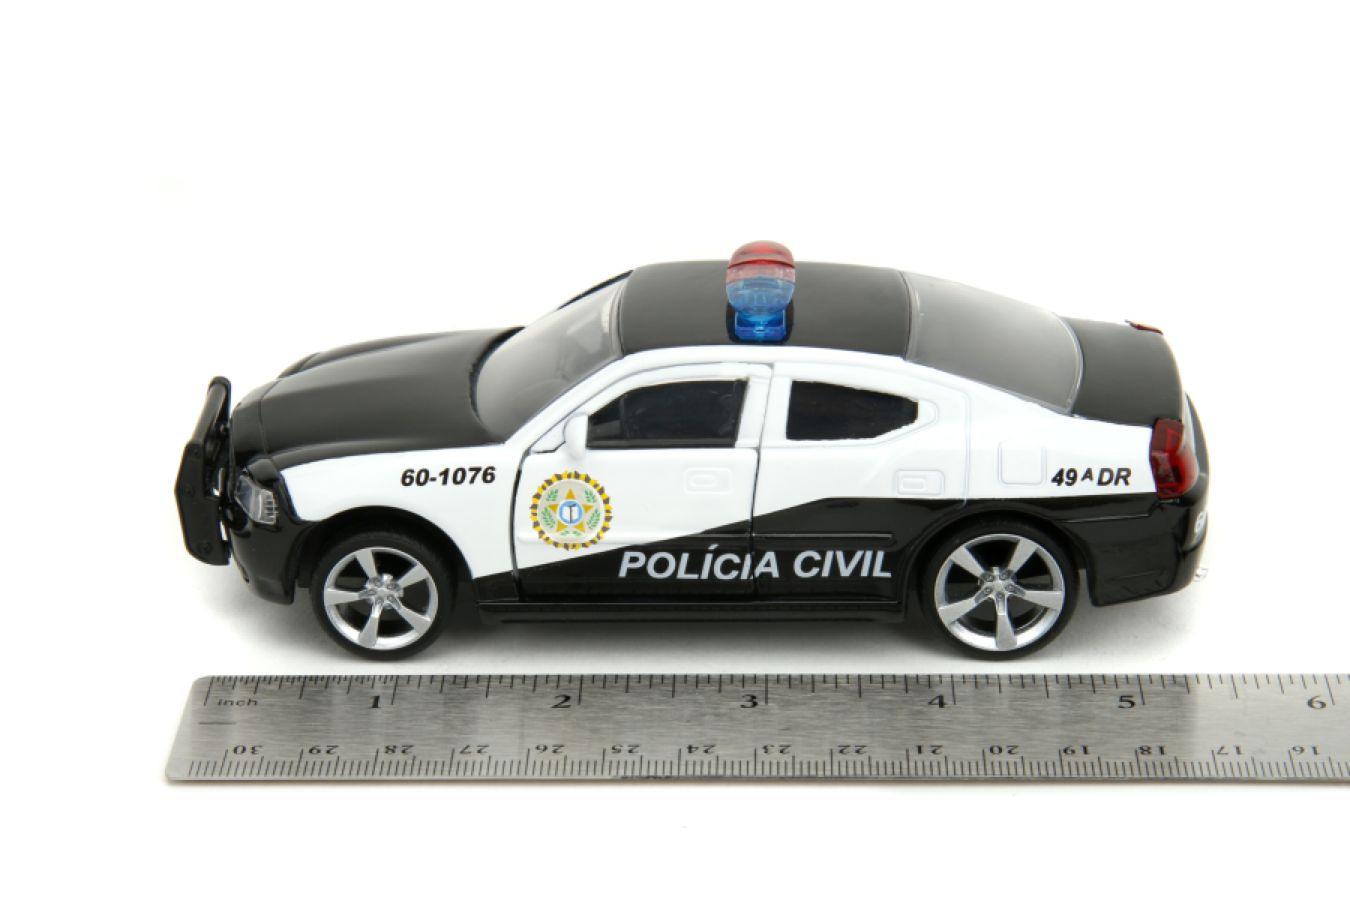 JAD33666 Fast & Furious 5 - Dodge Charger Police Car 1:32 Scale Hollywood Rides Diecast Vehicle - Jada Toys - Titan Pop Culture